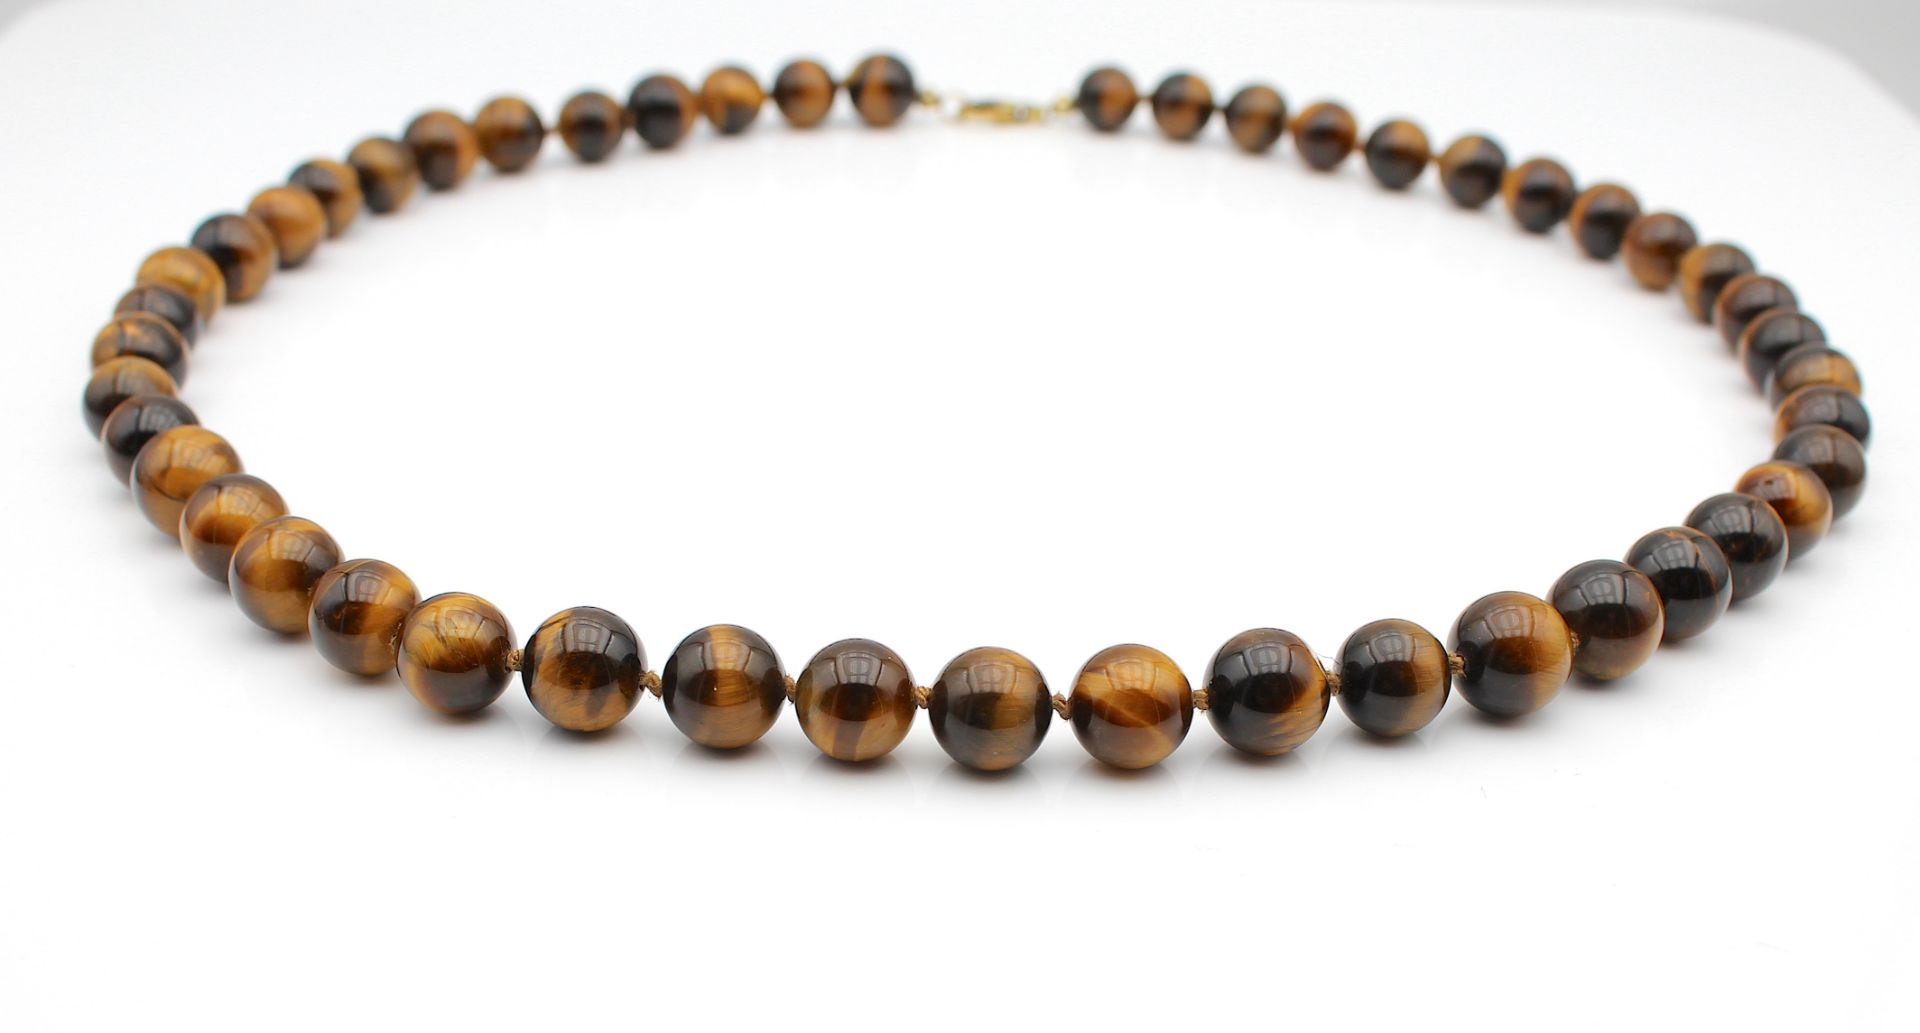 Very beautiful tiger eye necklace - Image 2 of 3